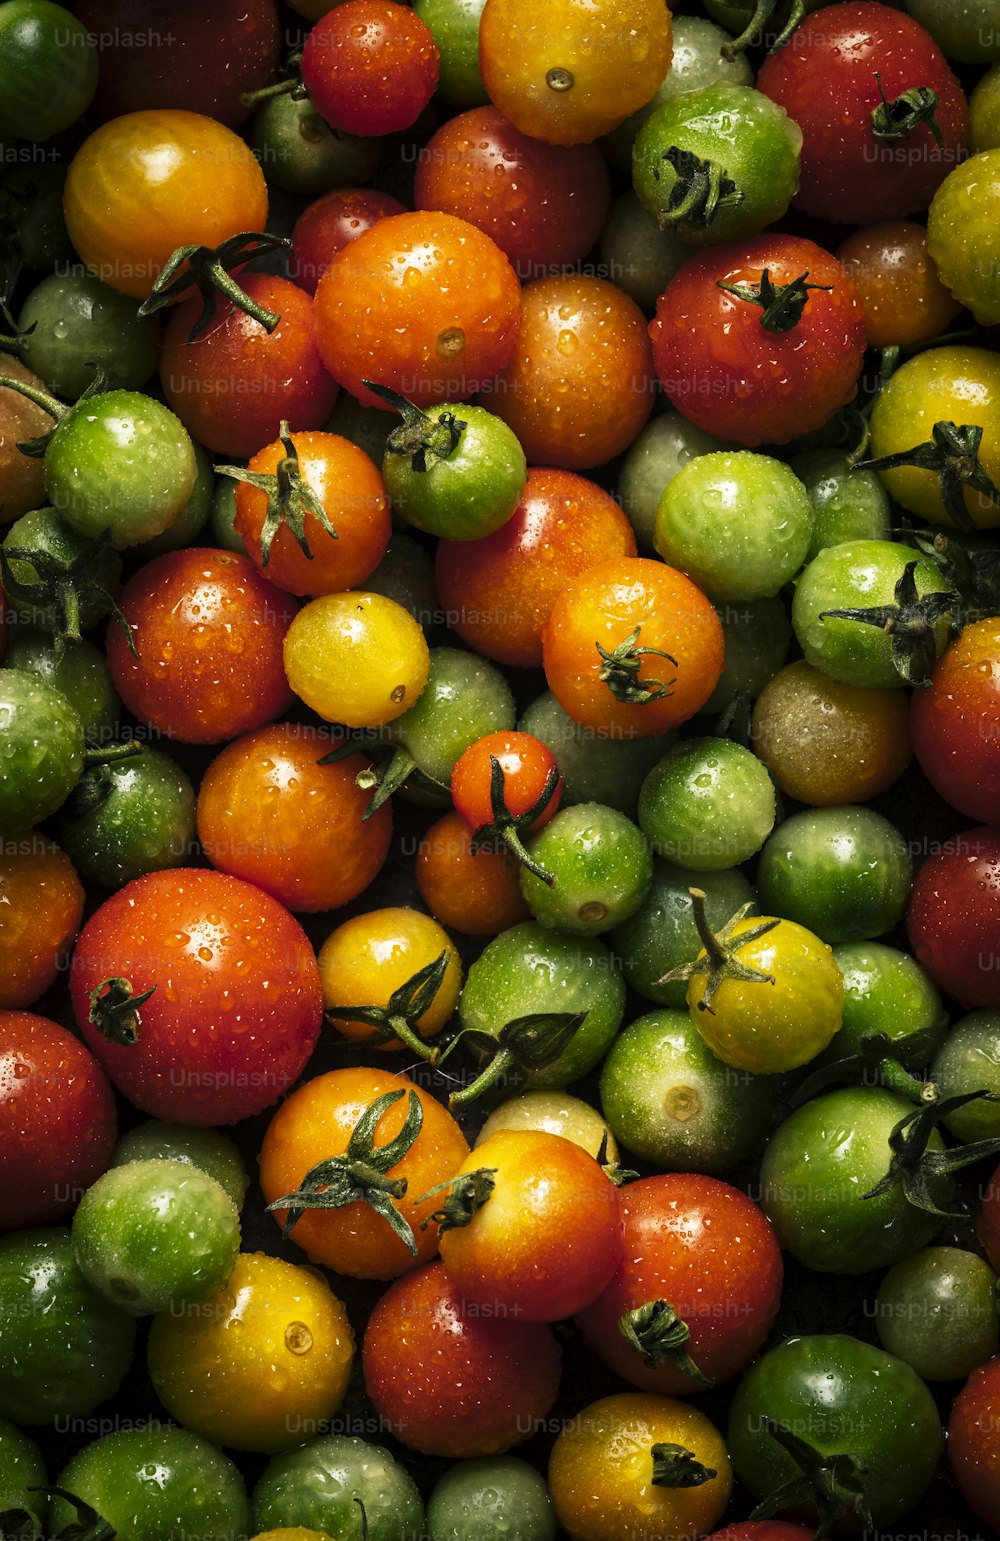 a large pile of tomatoes and other fruits